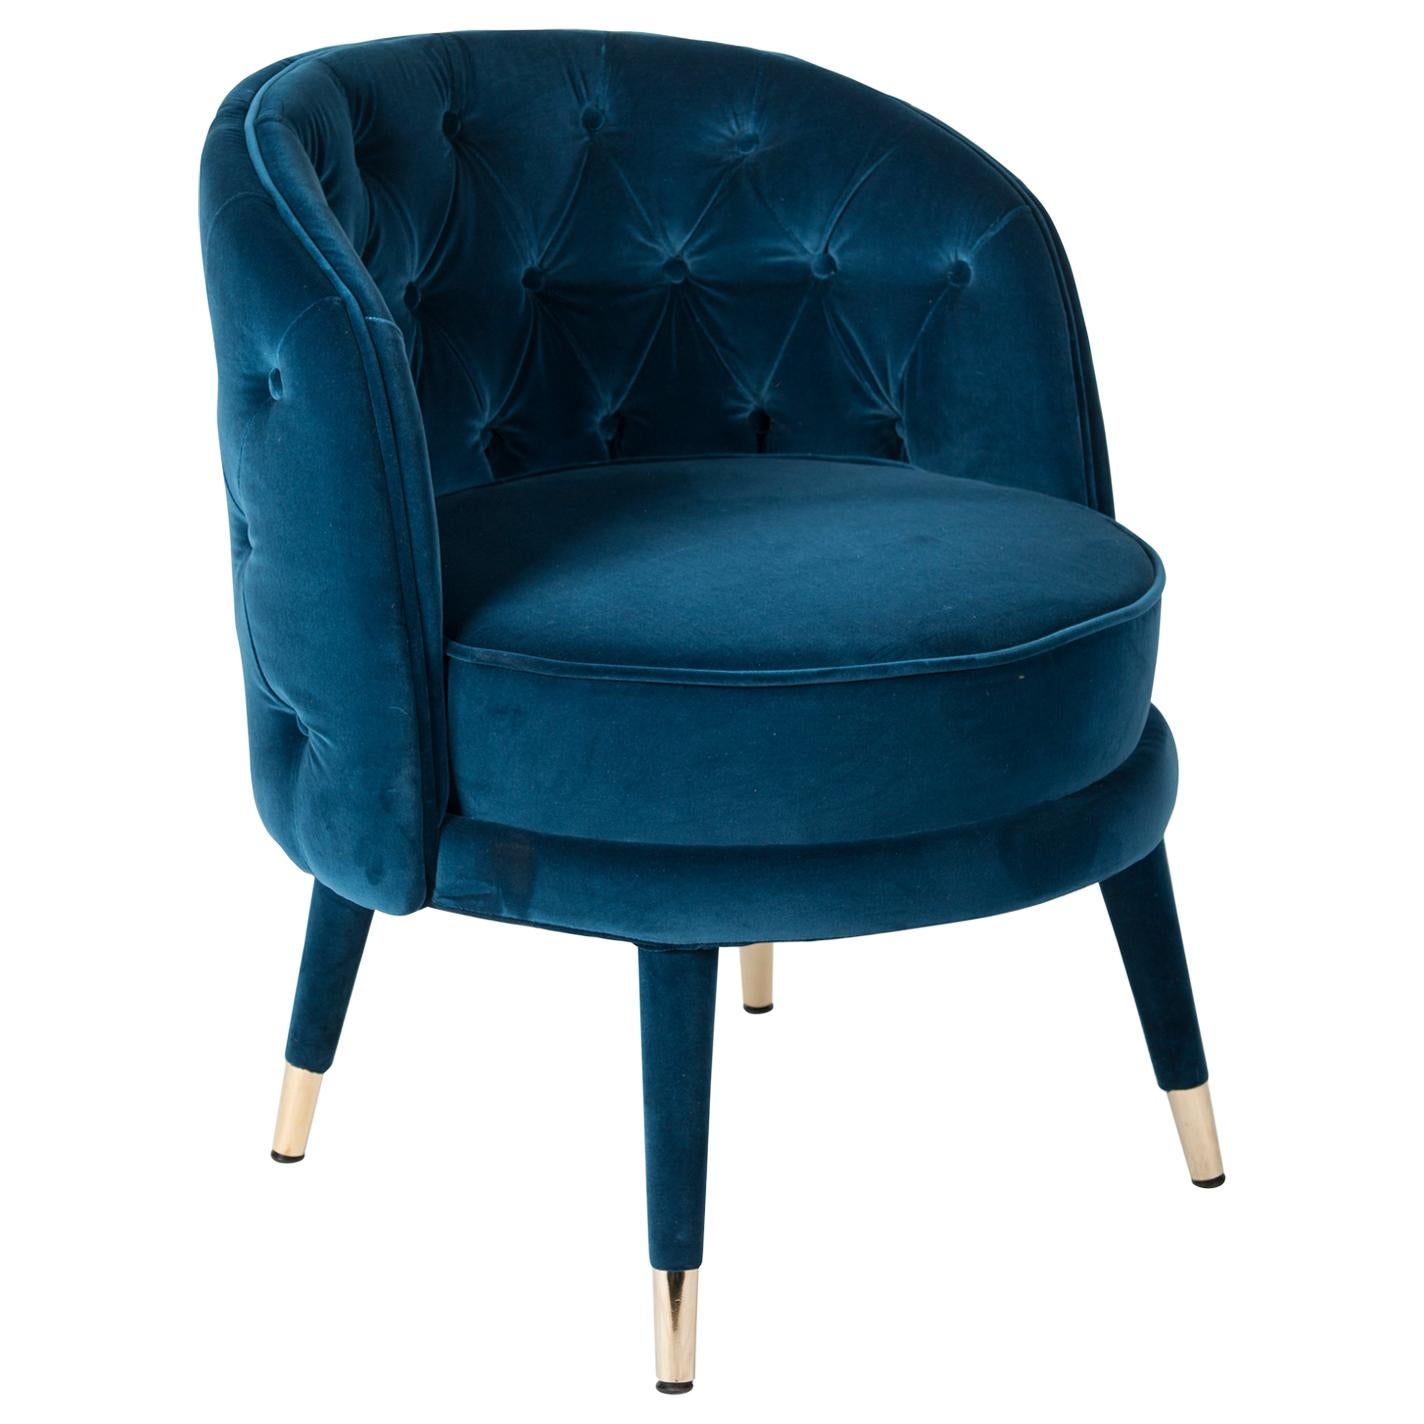 Armchair Round Capitonné, Blue Velvet Fabric, Made in Italy